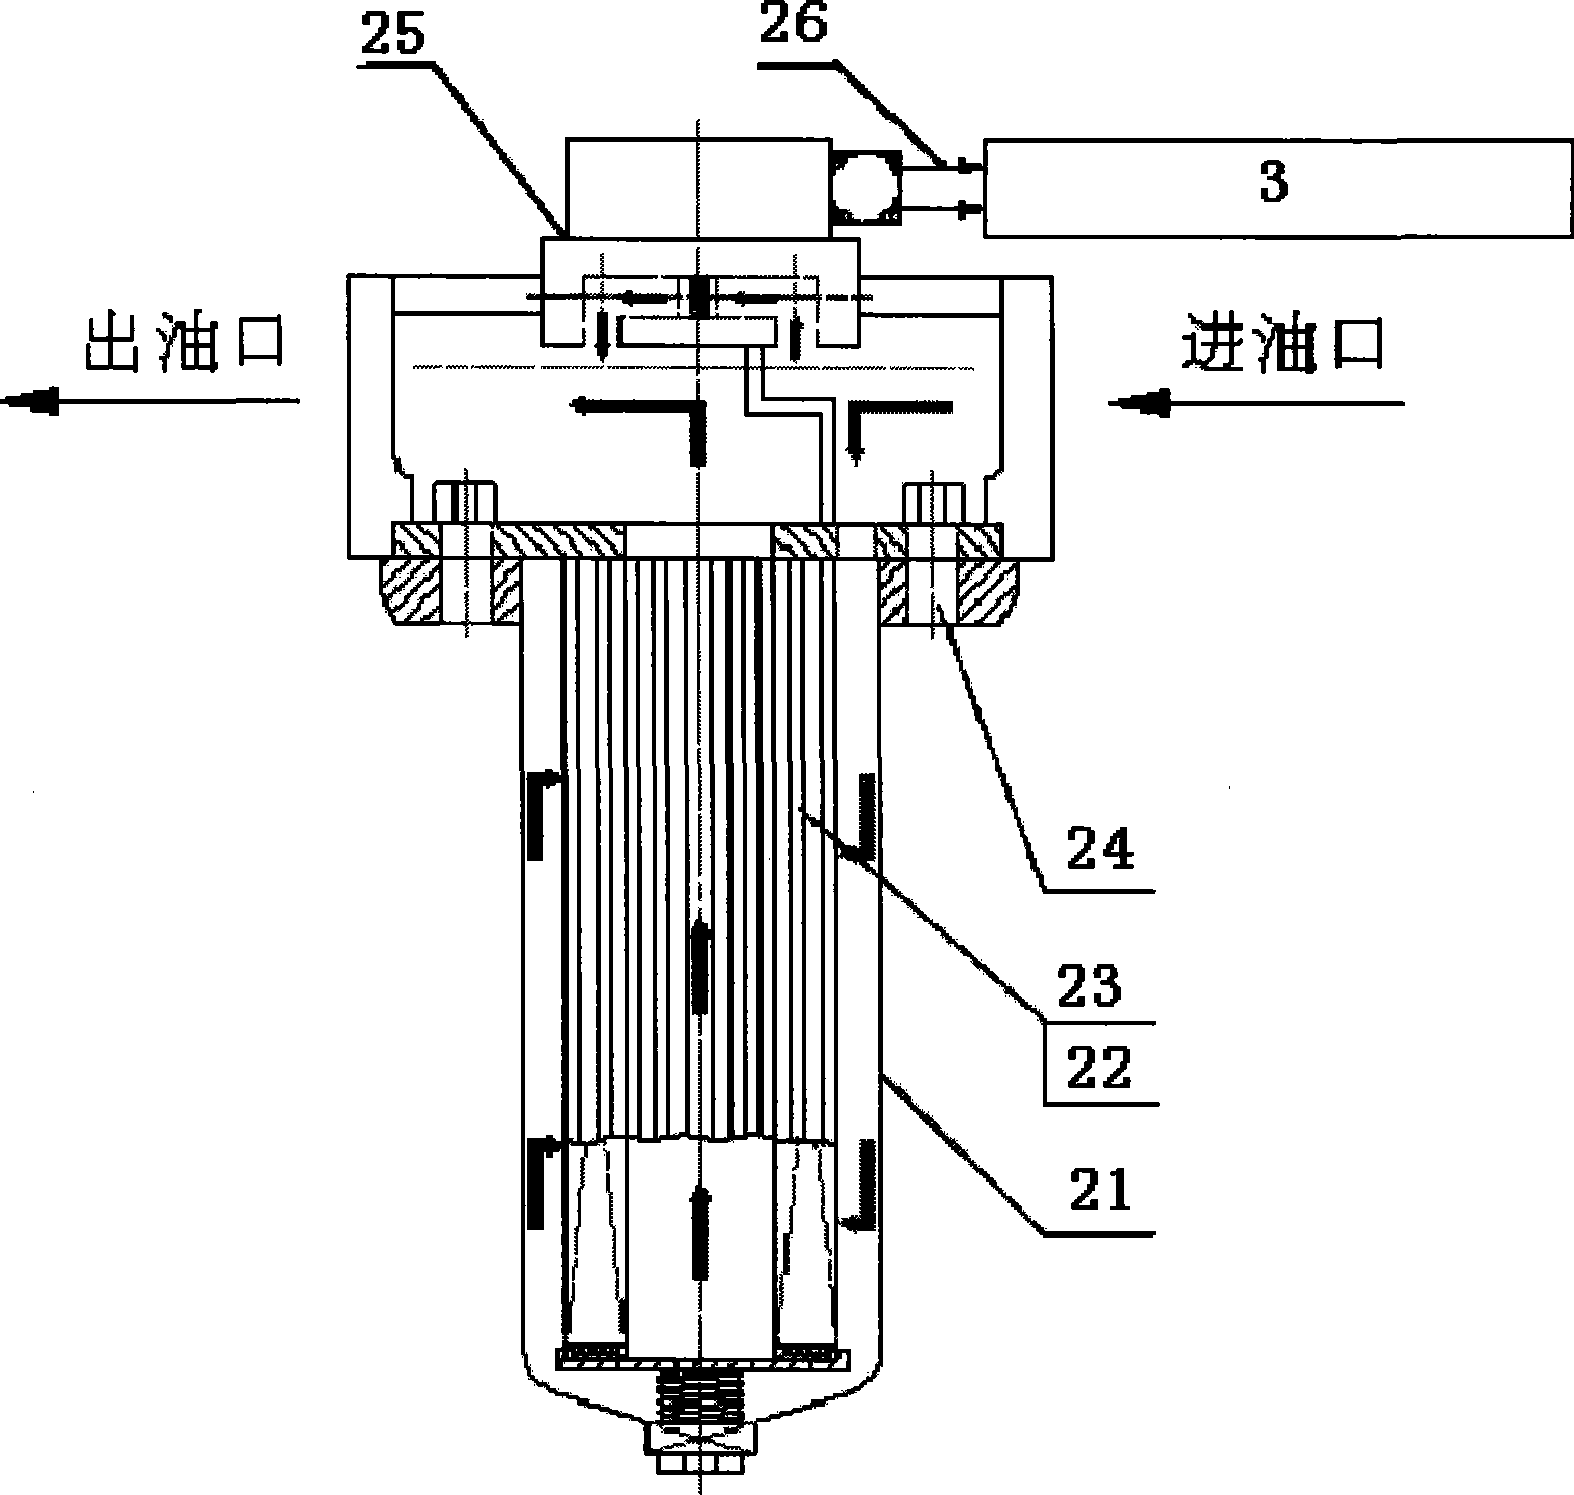 Oil liquid pollution monitoring, cleaning and filtrating apparatus for embedded hydraulic power system